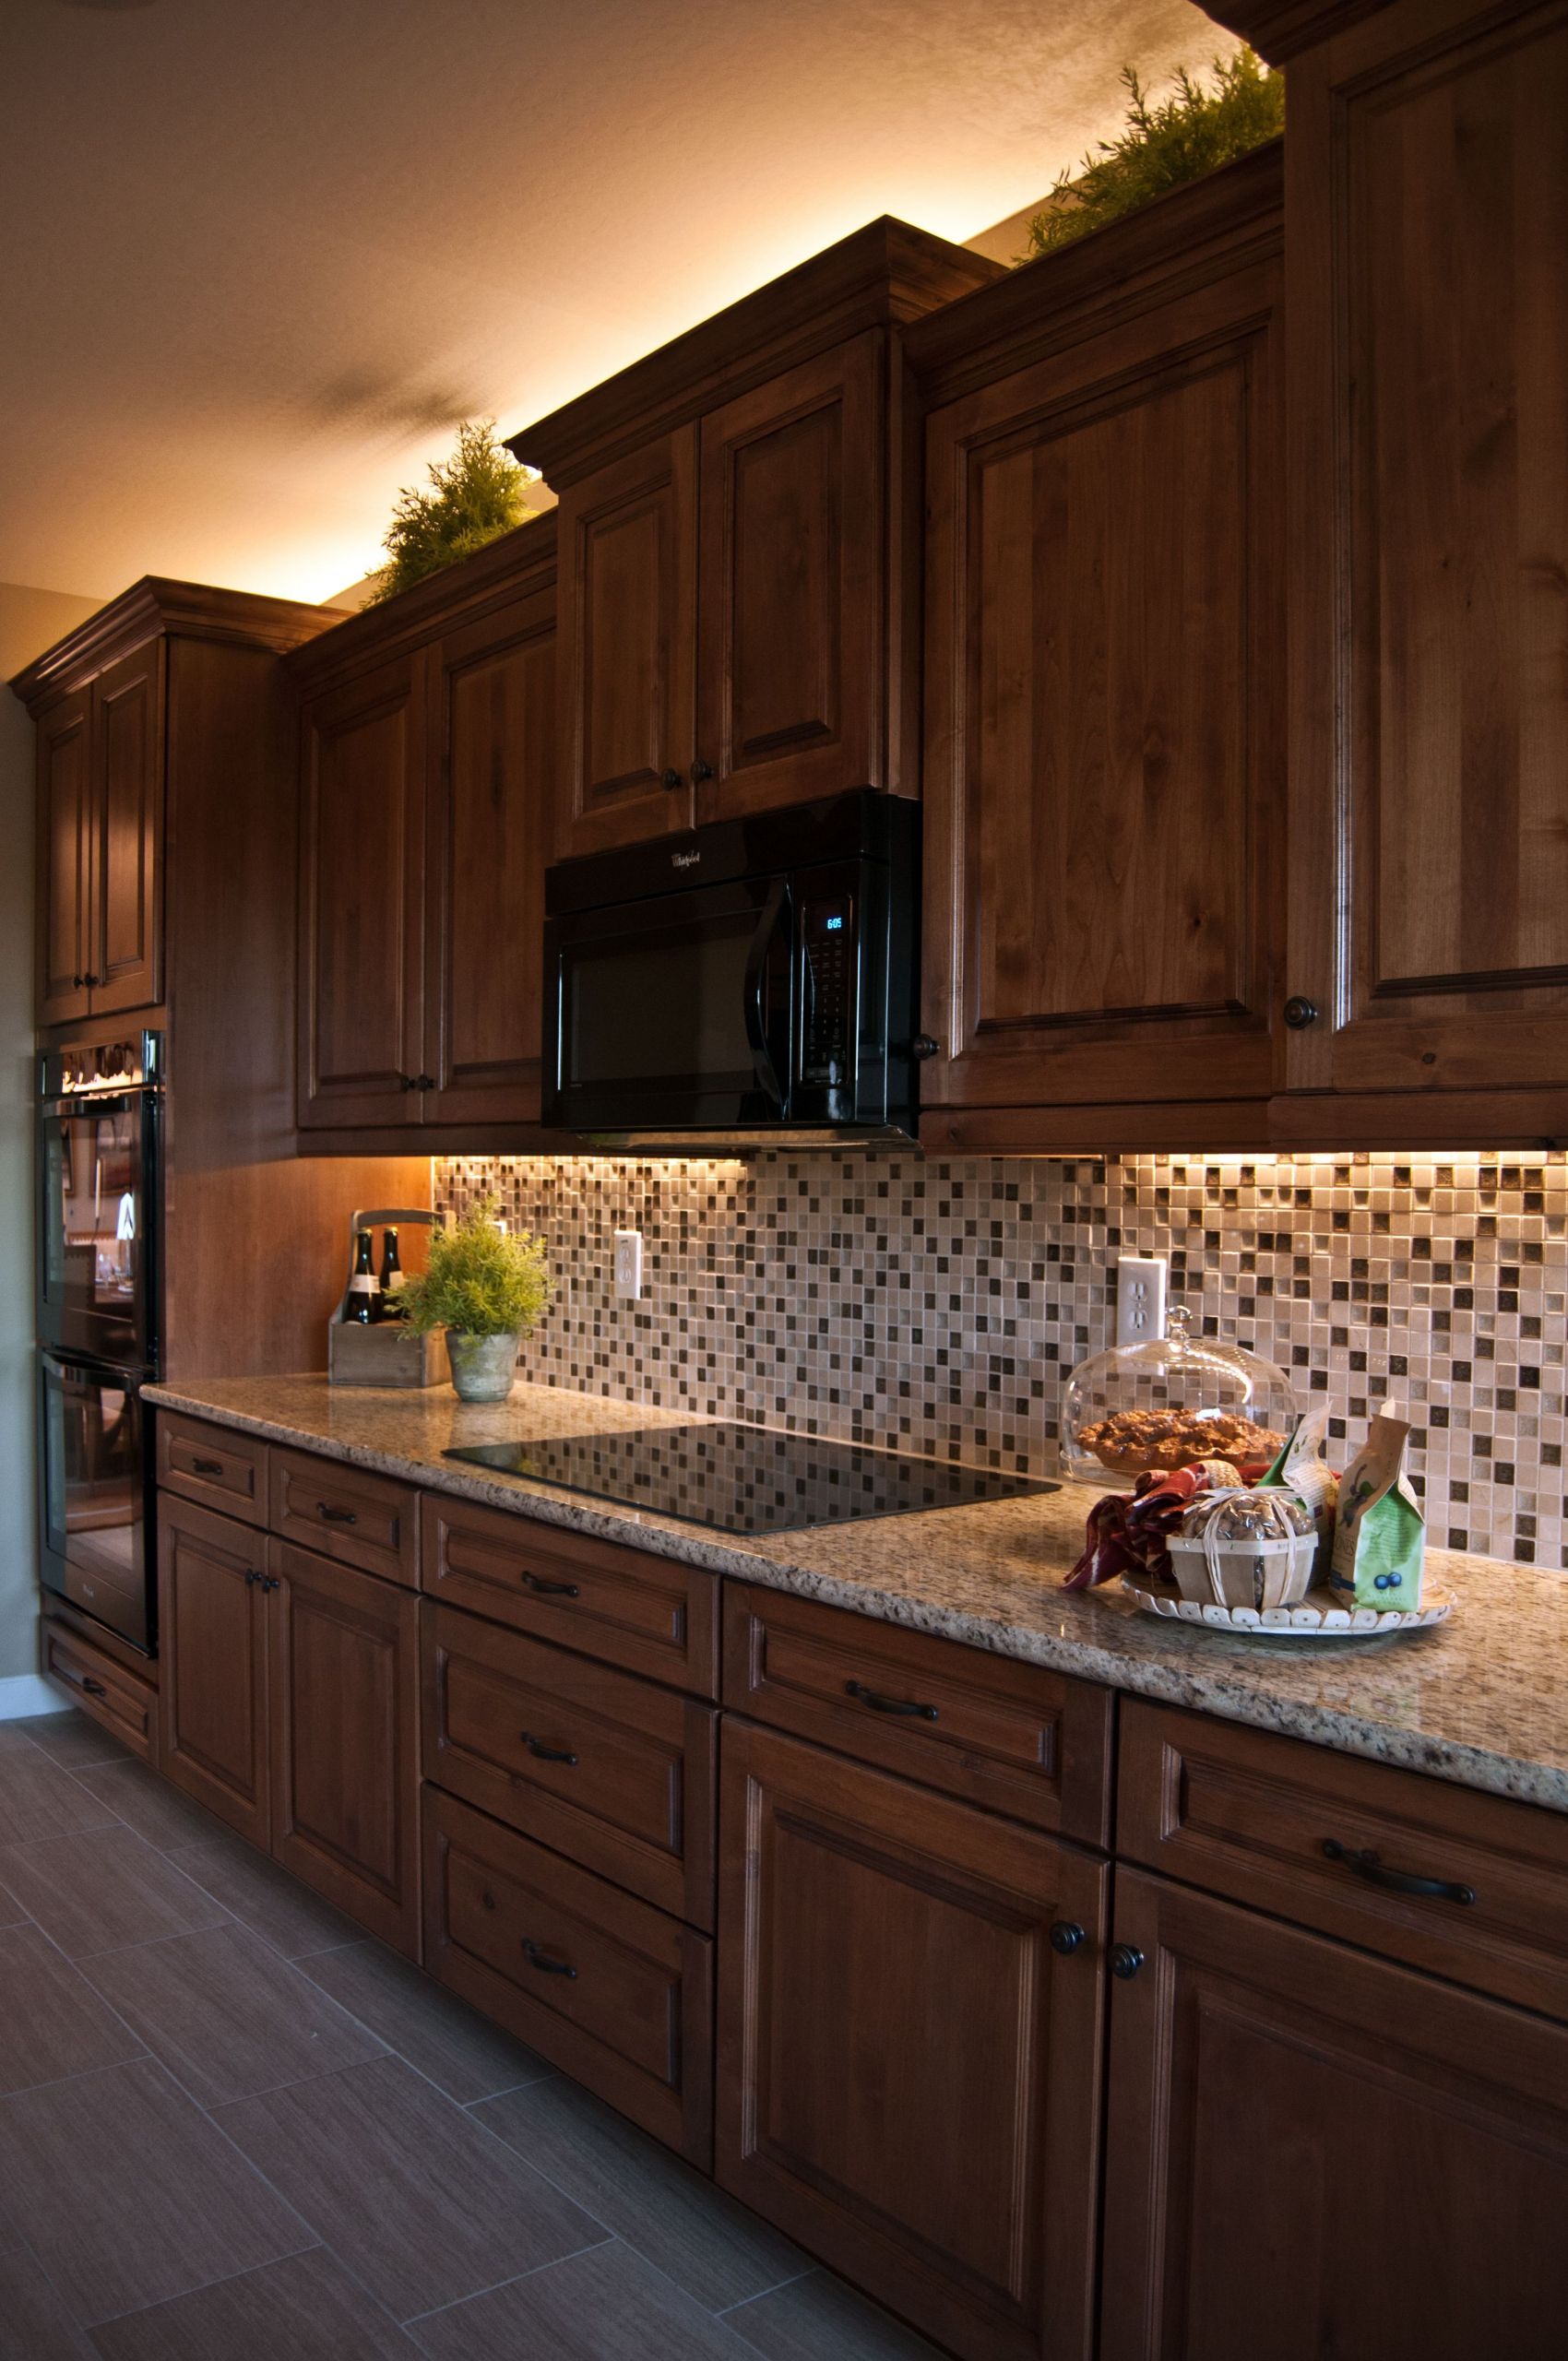 Kitchen Led Lighting Under Cabinet
 Inspired LED lighting in traditional style kitchen warm